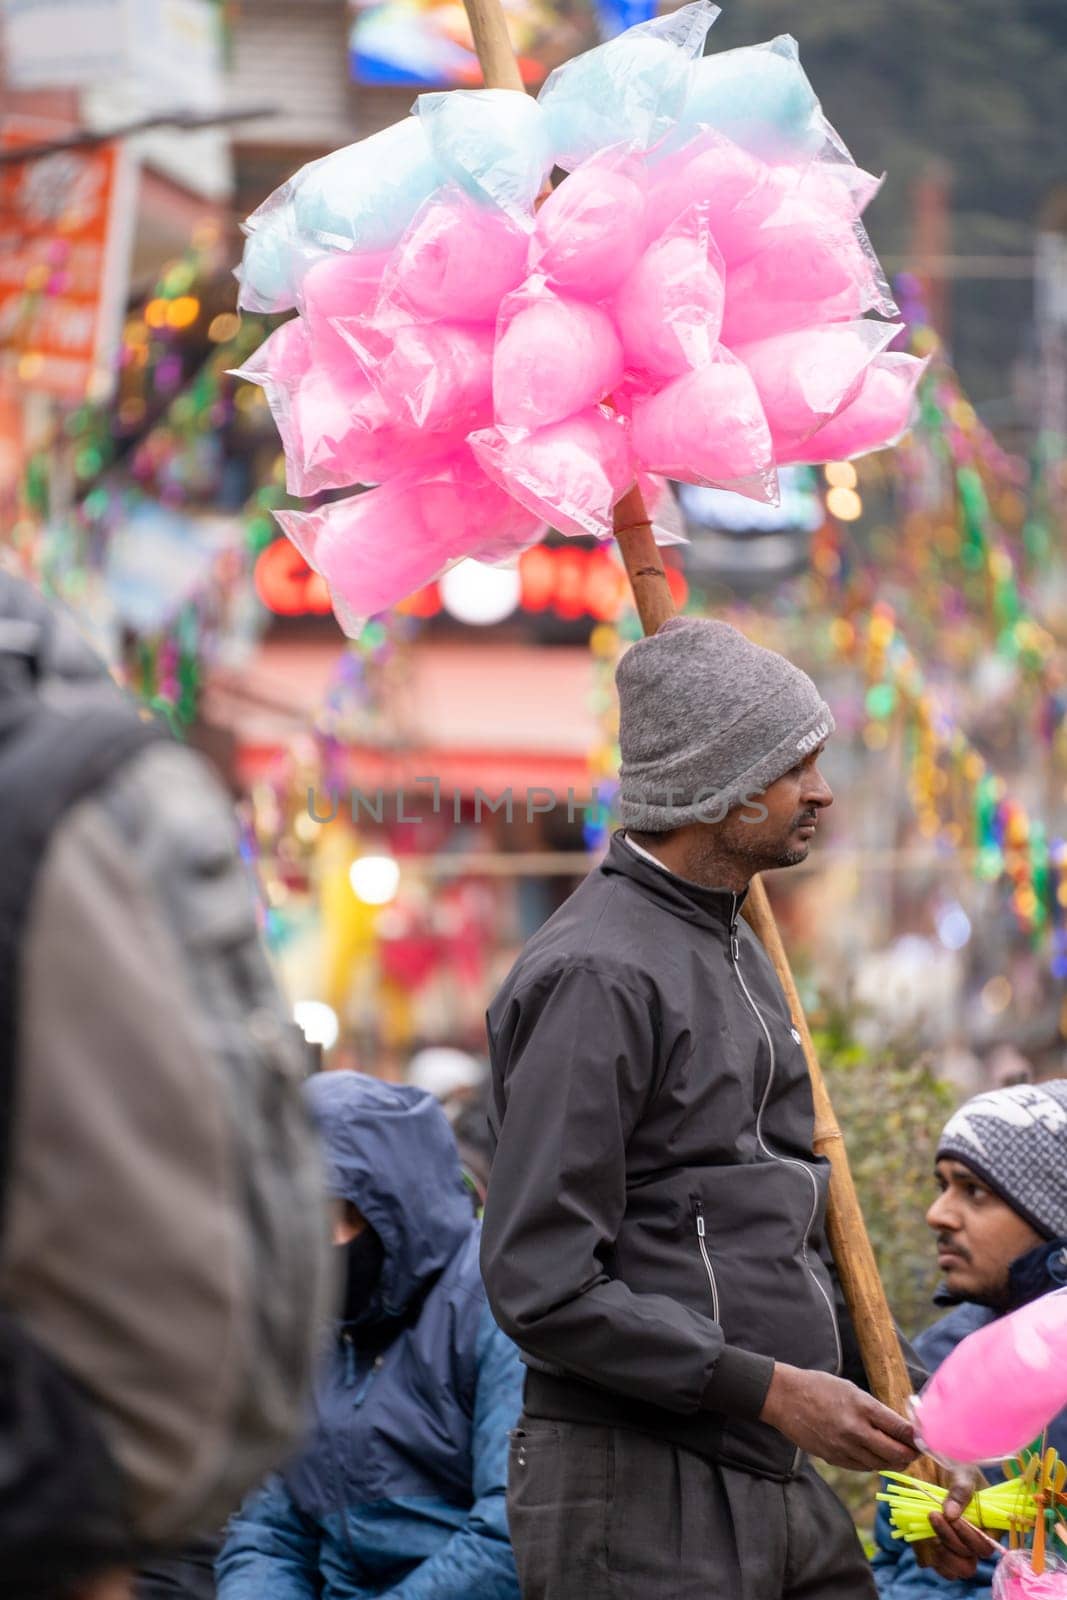 Man selling cotton candy being sold in small poly bags mounted on a stick making a cloud of candy by Shalinimathur